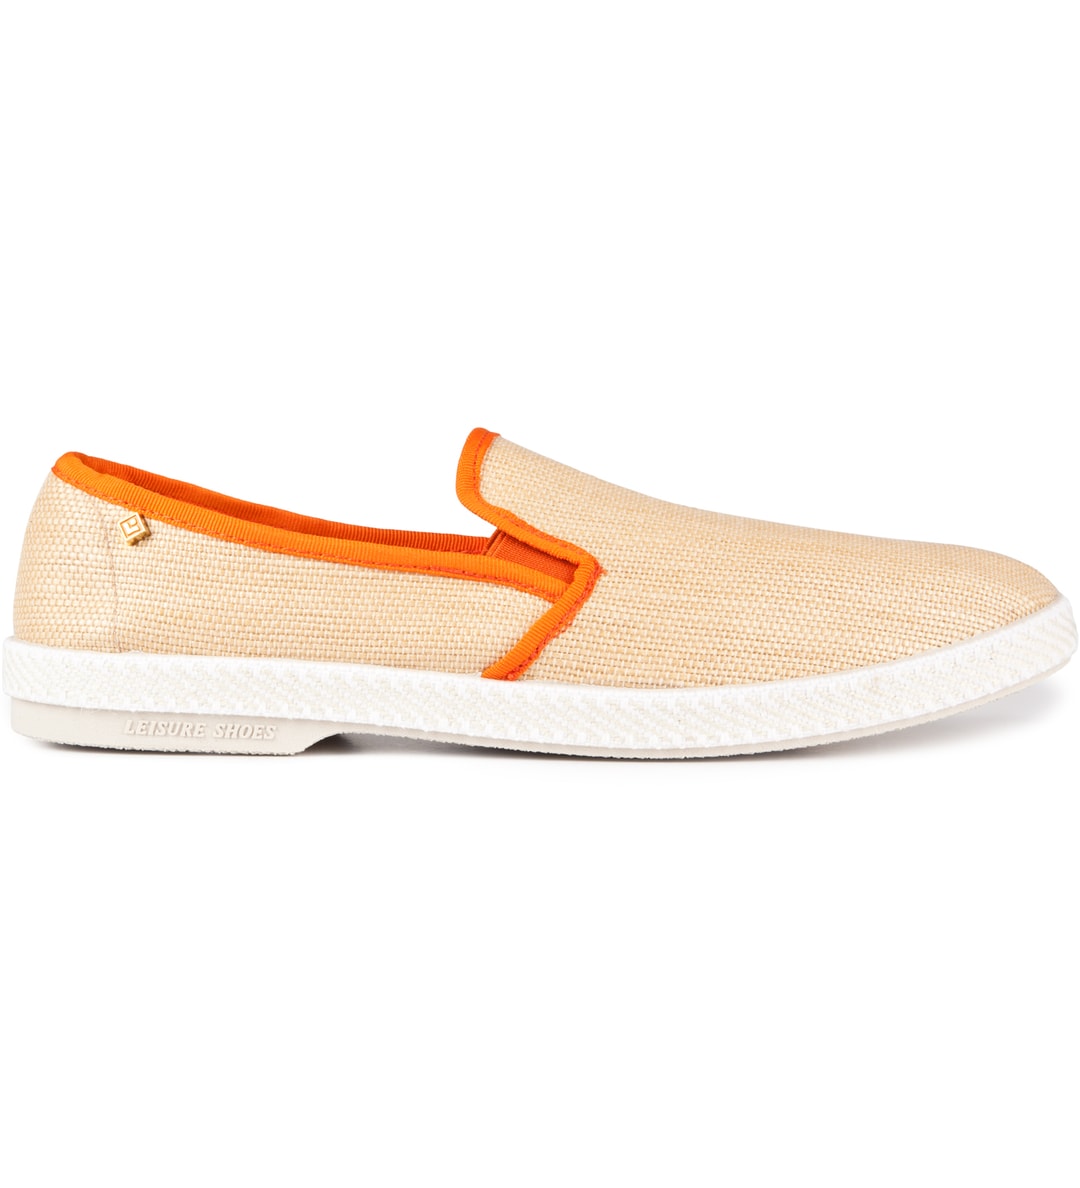 Rivieras - Orange Montecritsi Shoe | HBX - Globally Curated Fashion and ...